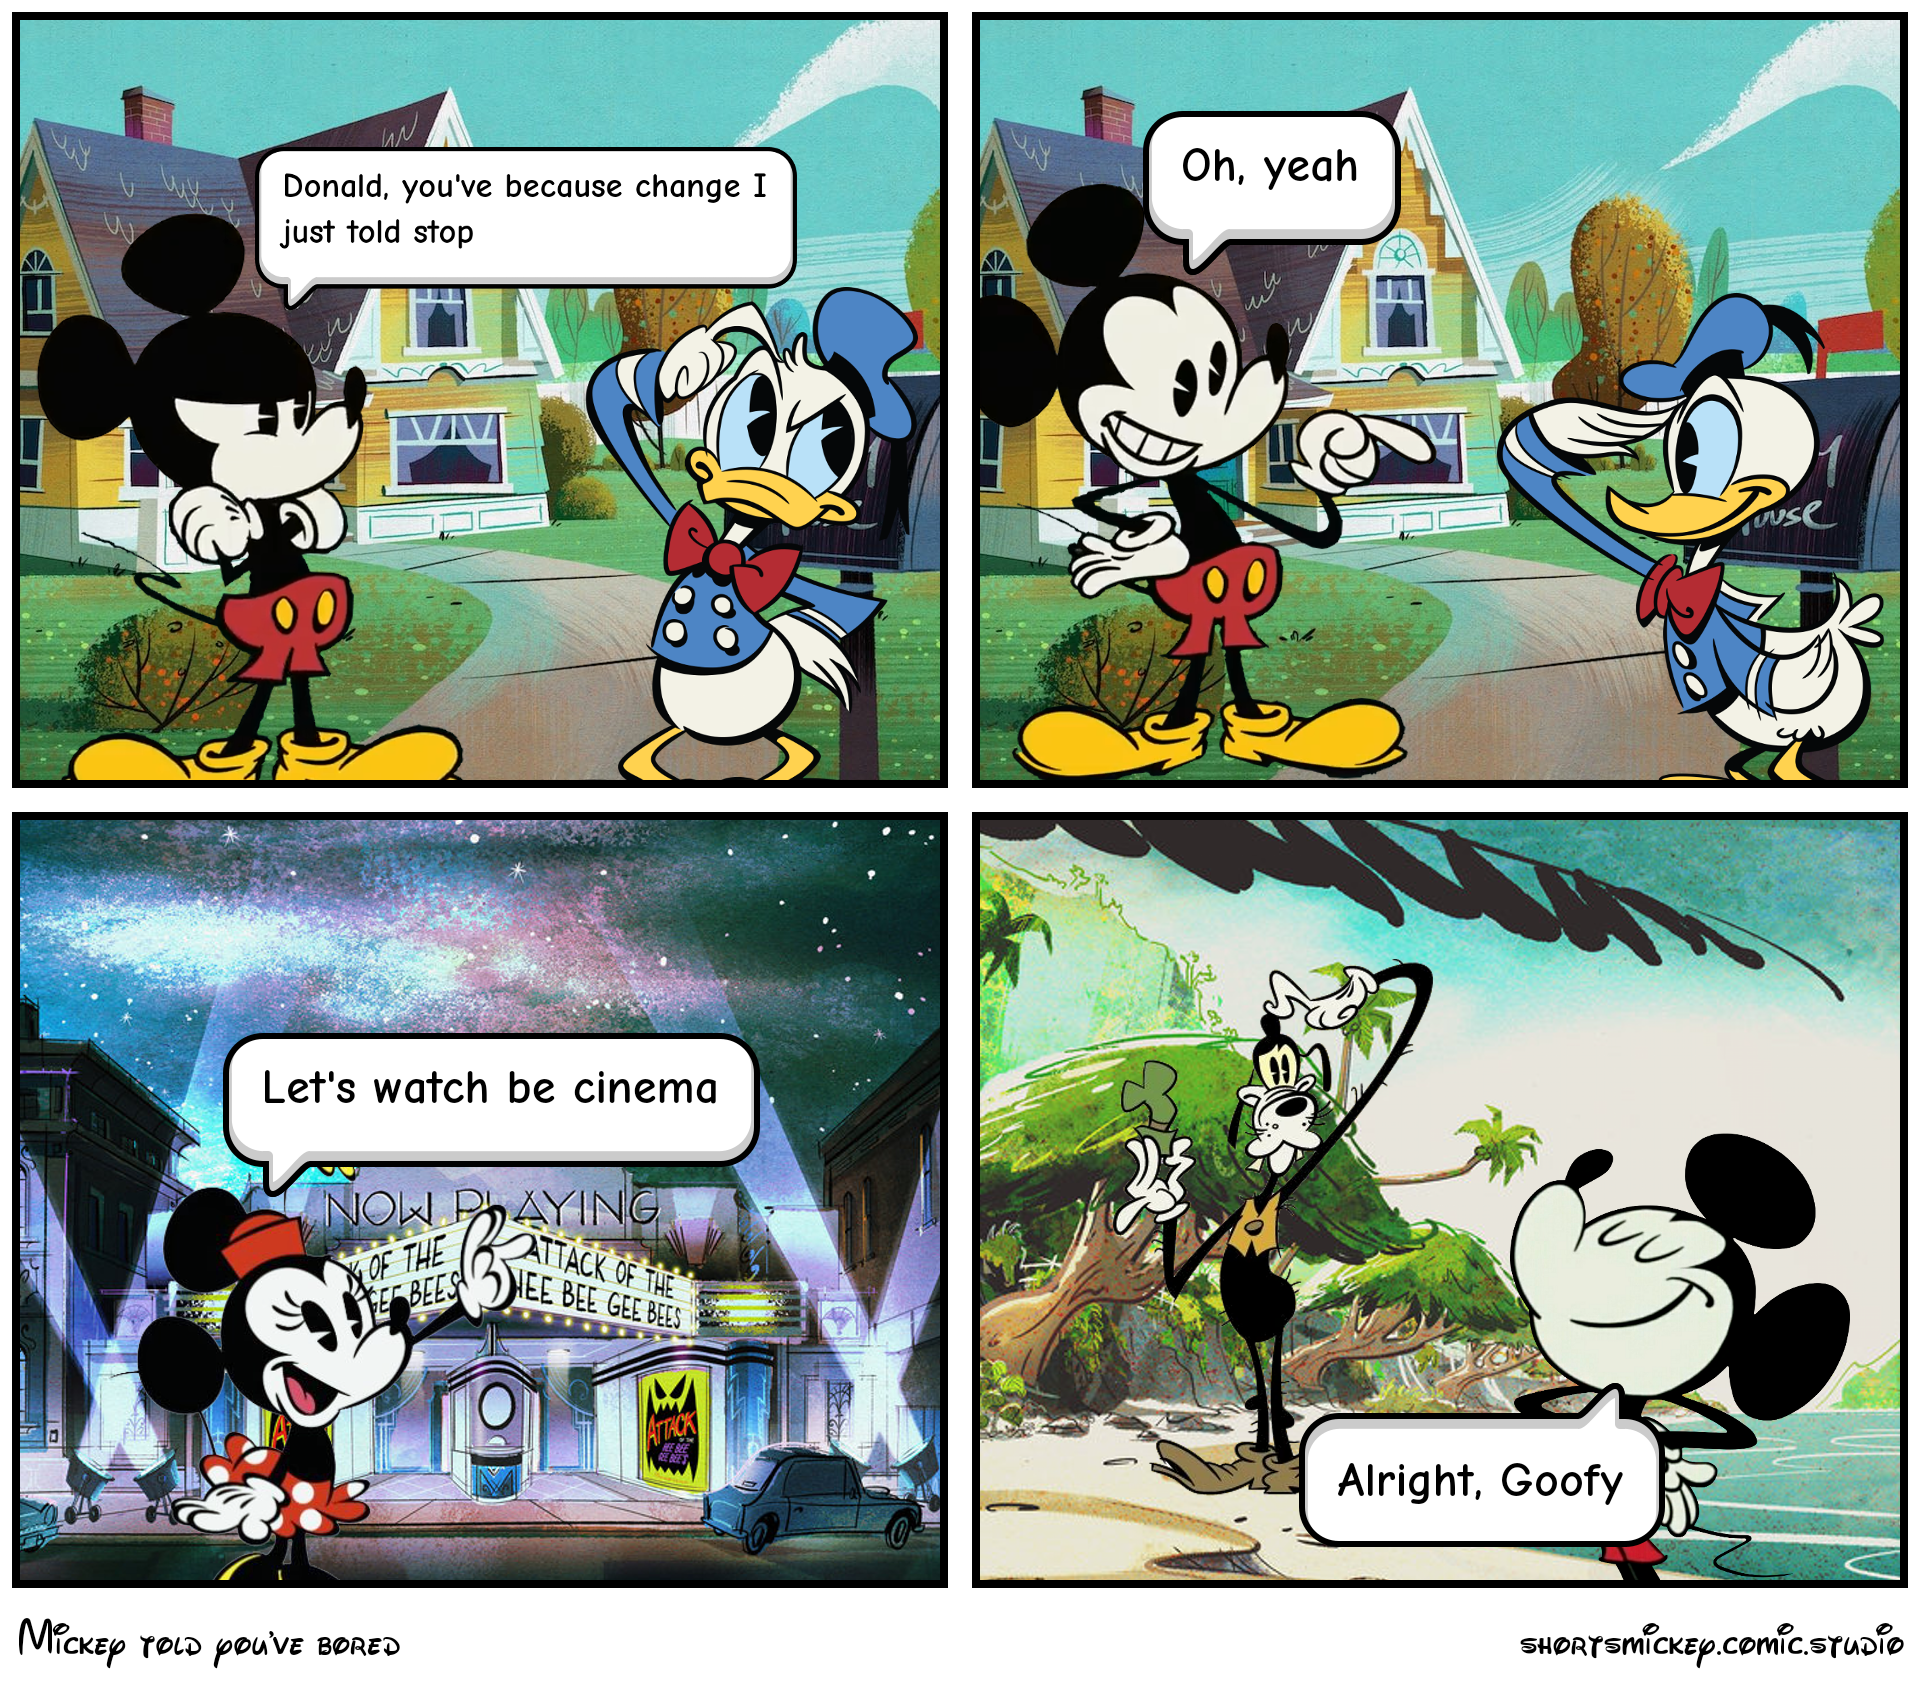 Mickey told you've bored